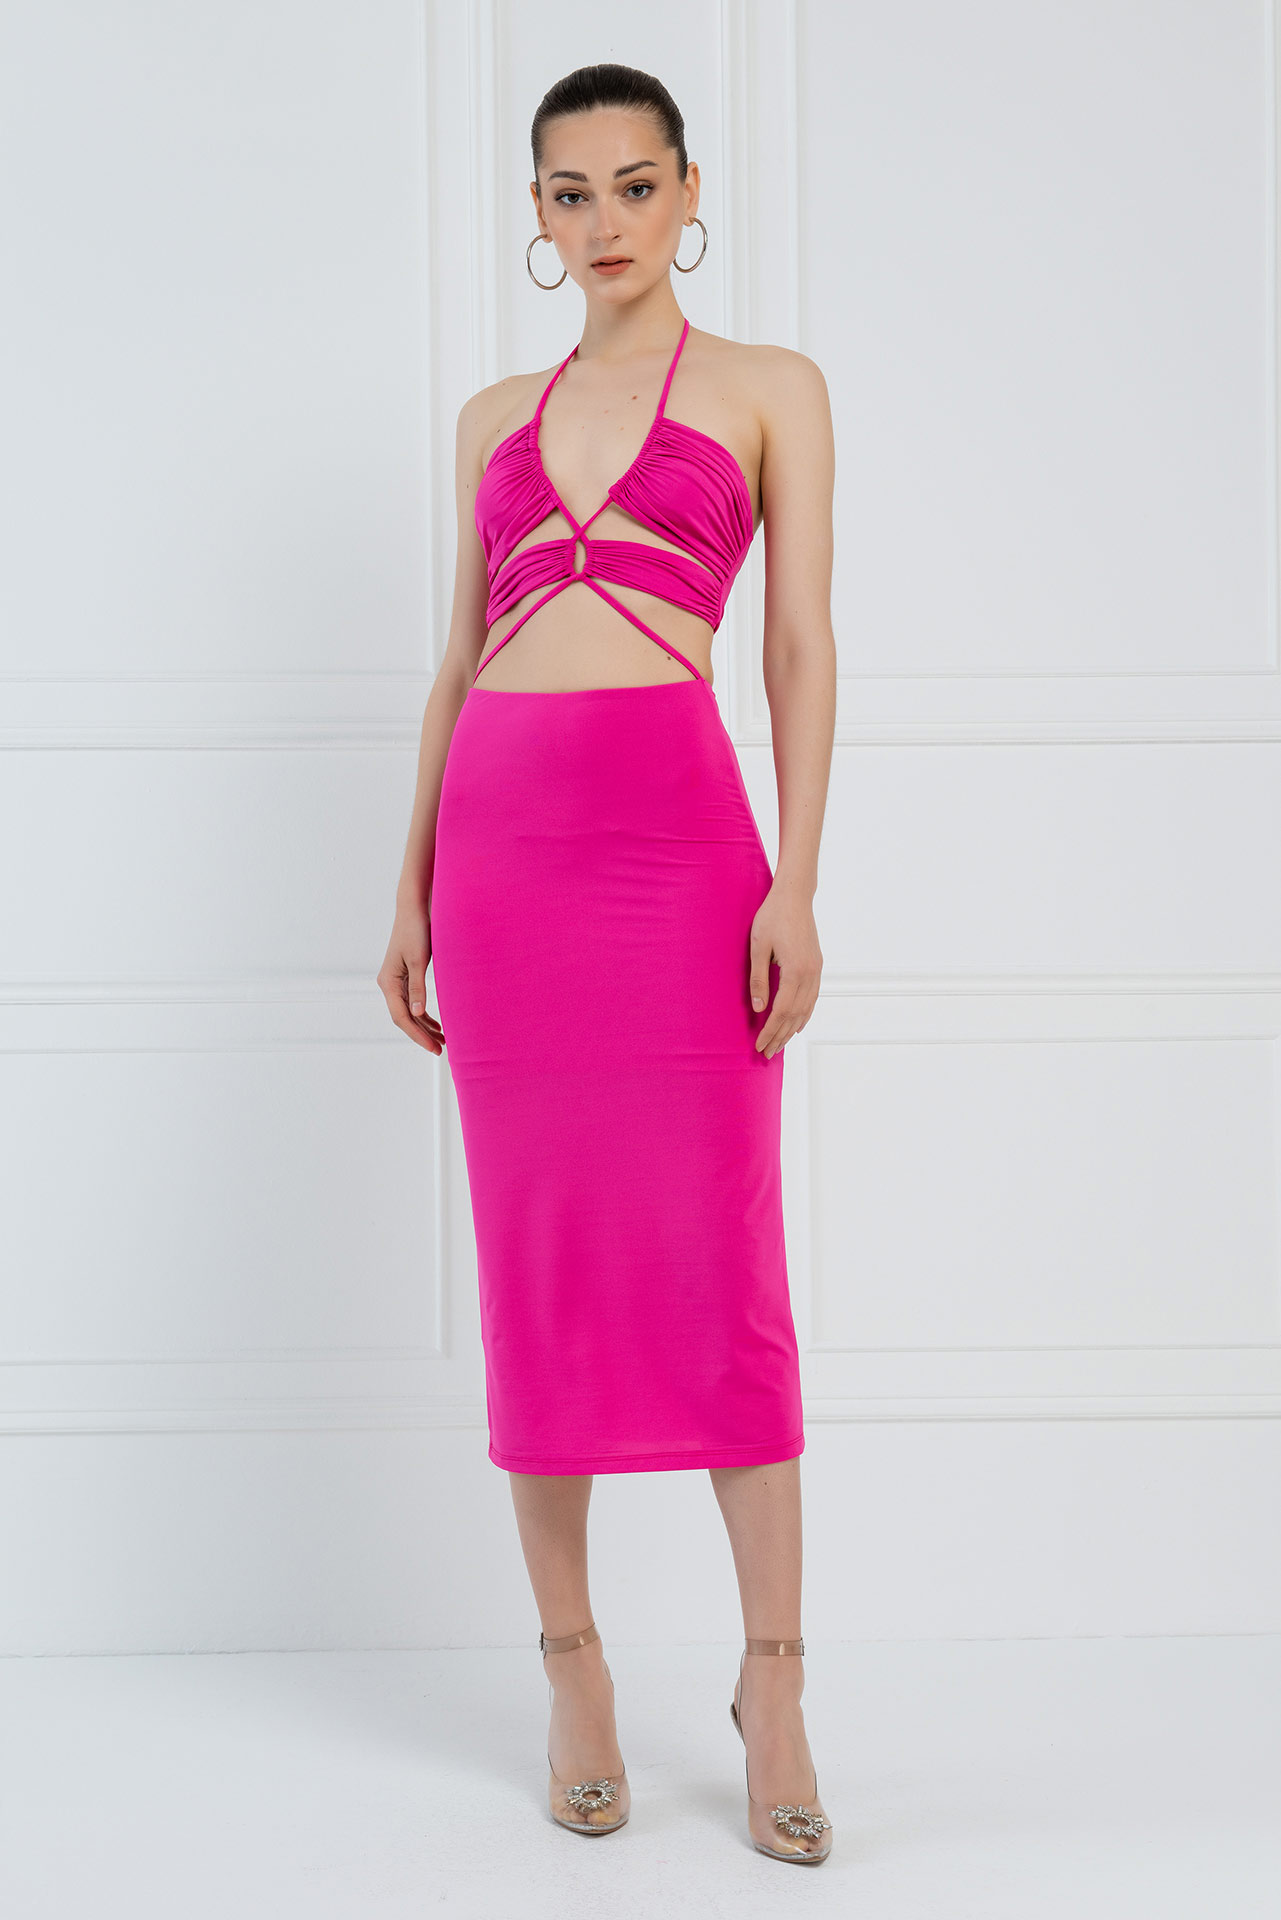 Wholesale New Fuschia Strappy Cut Out Dress